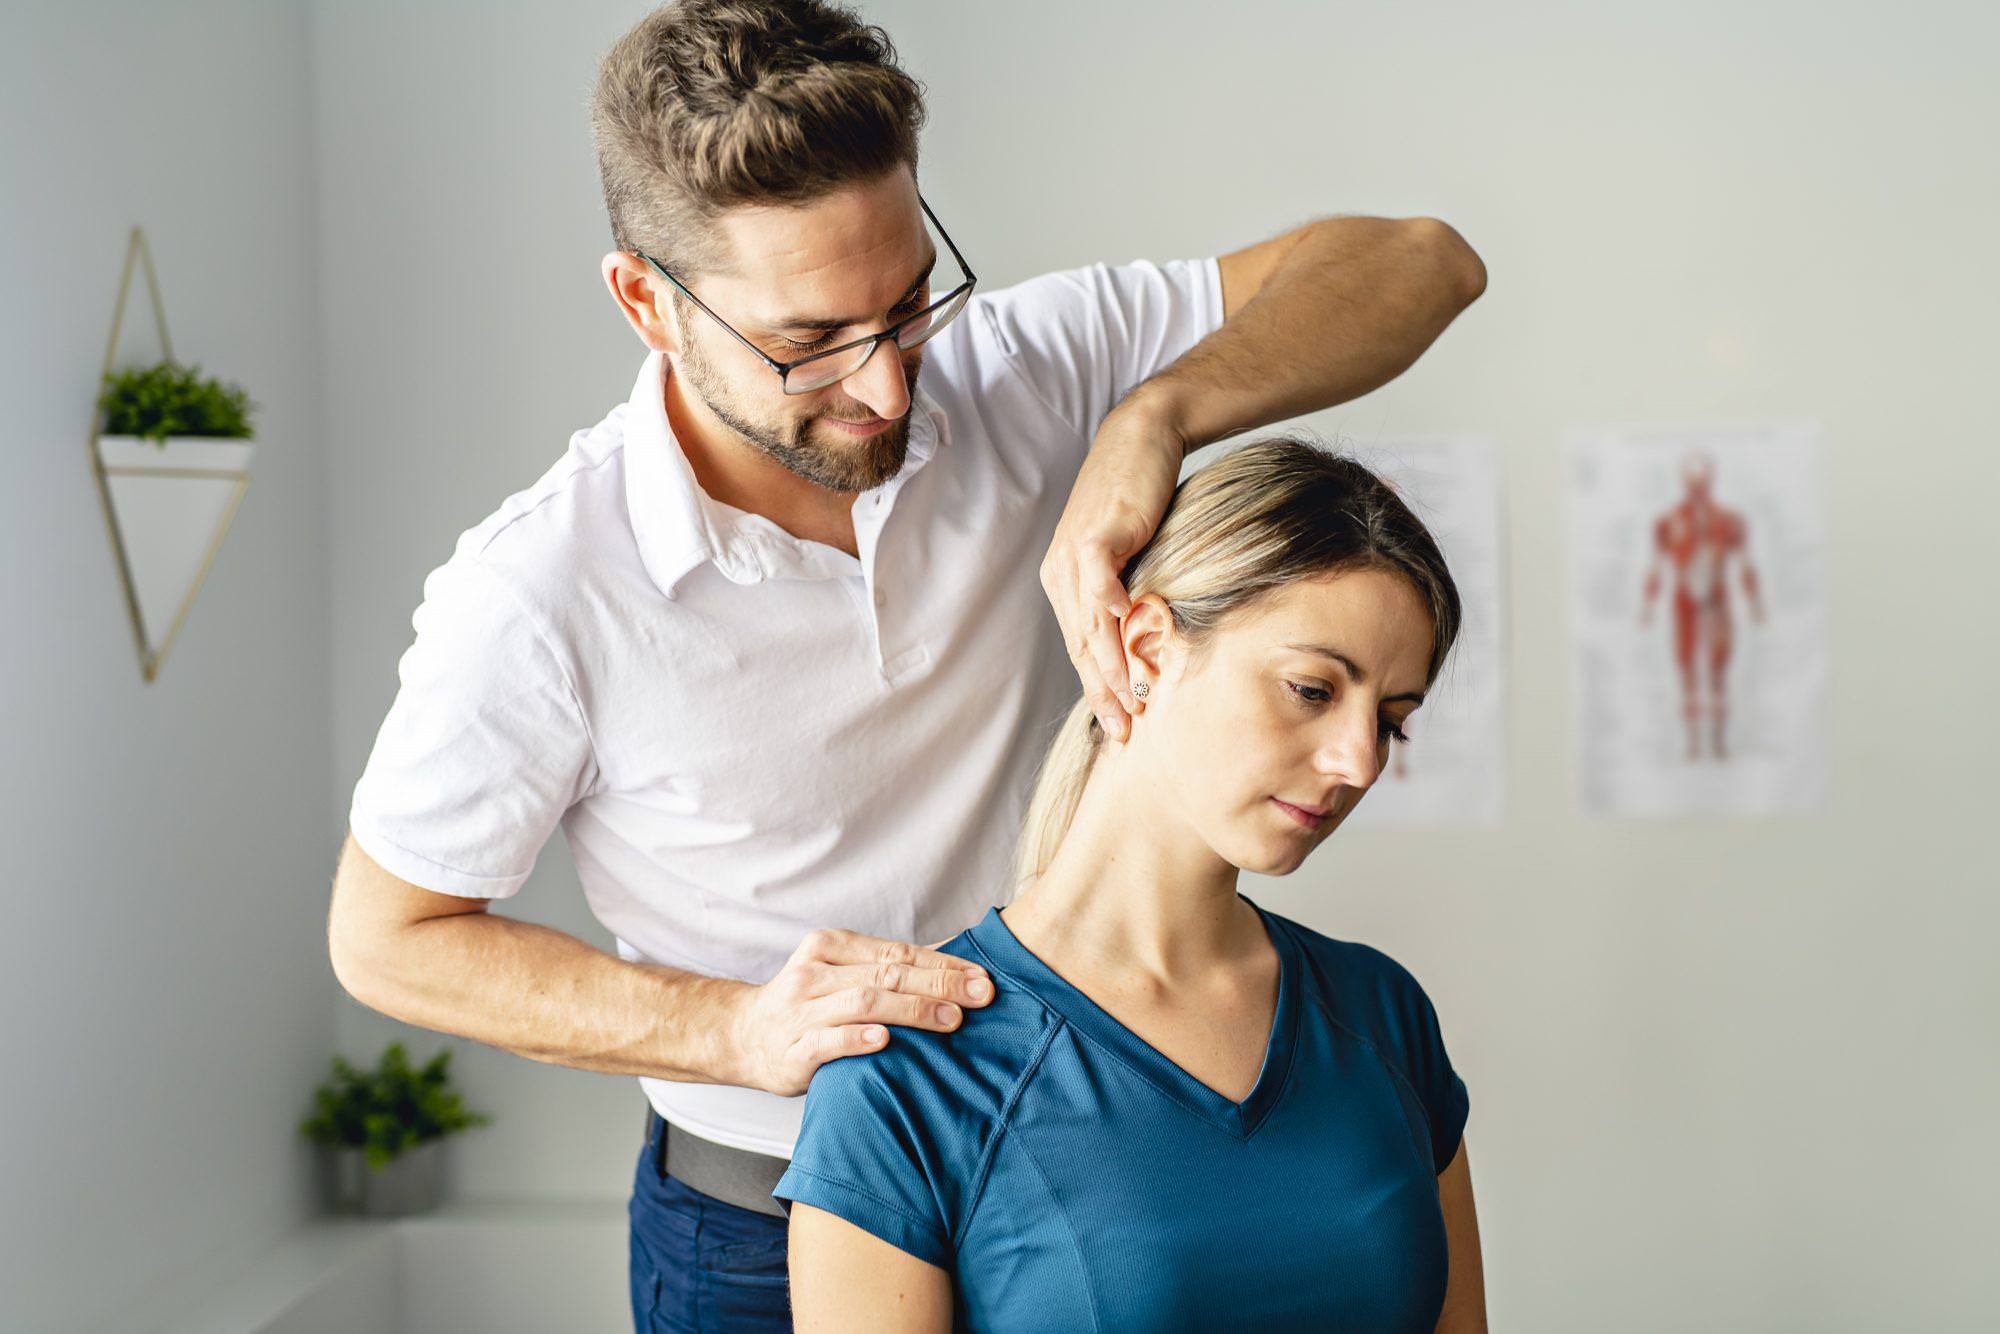 Physical therapist’s roles are broad and diverse, misconceptions still exis...